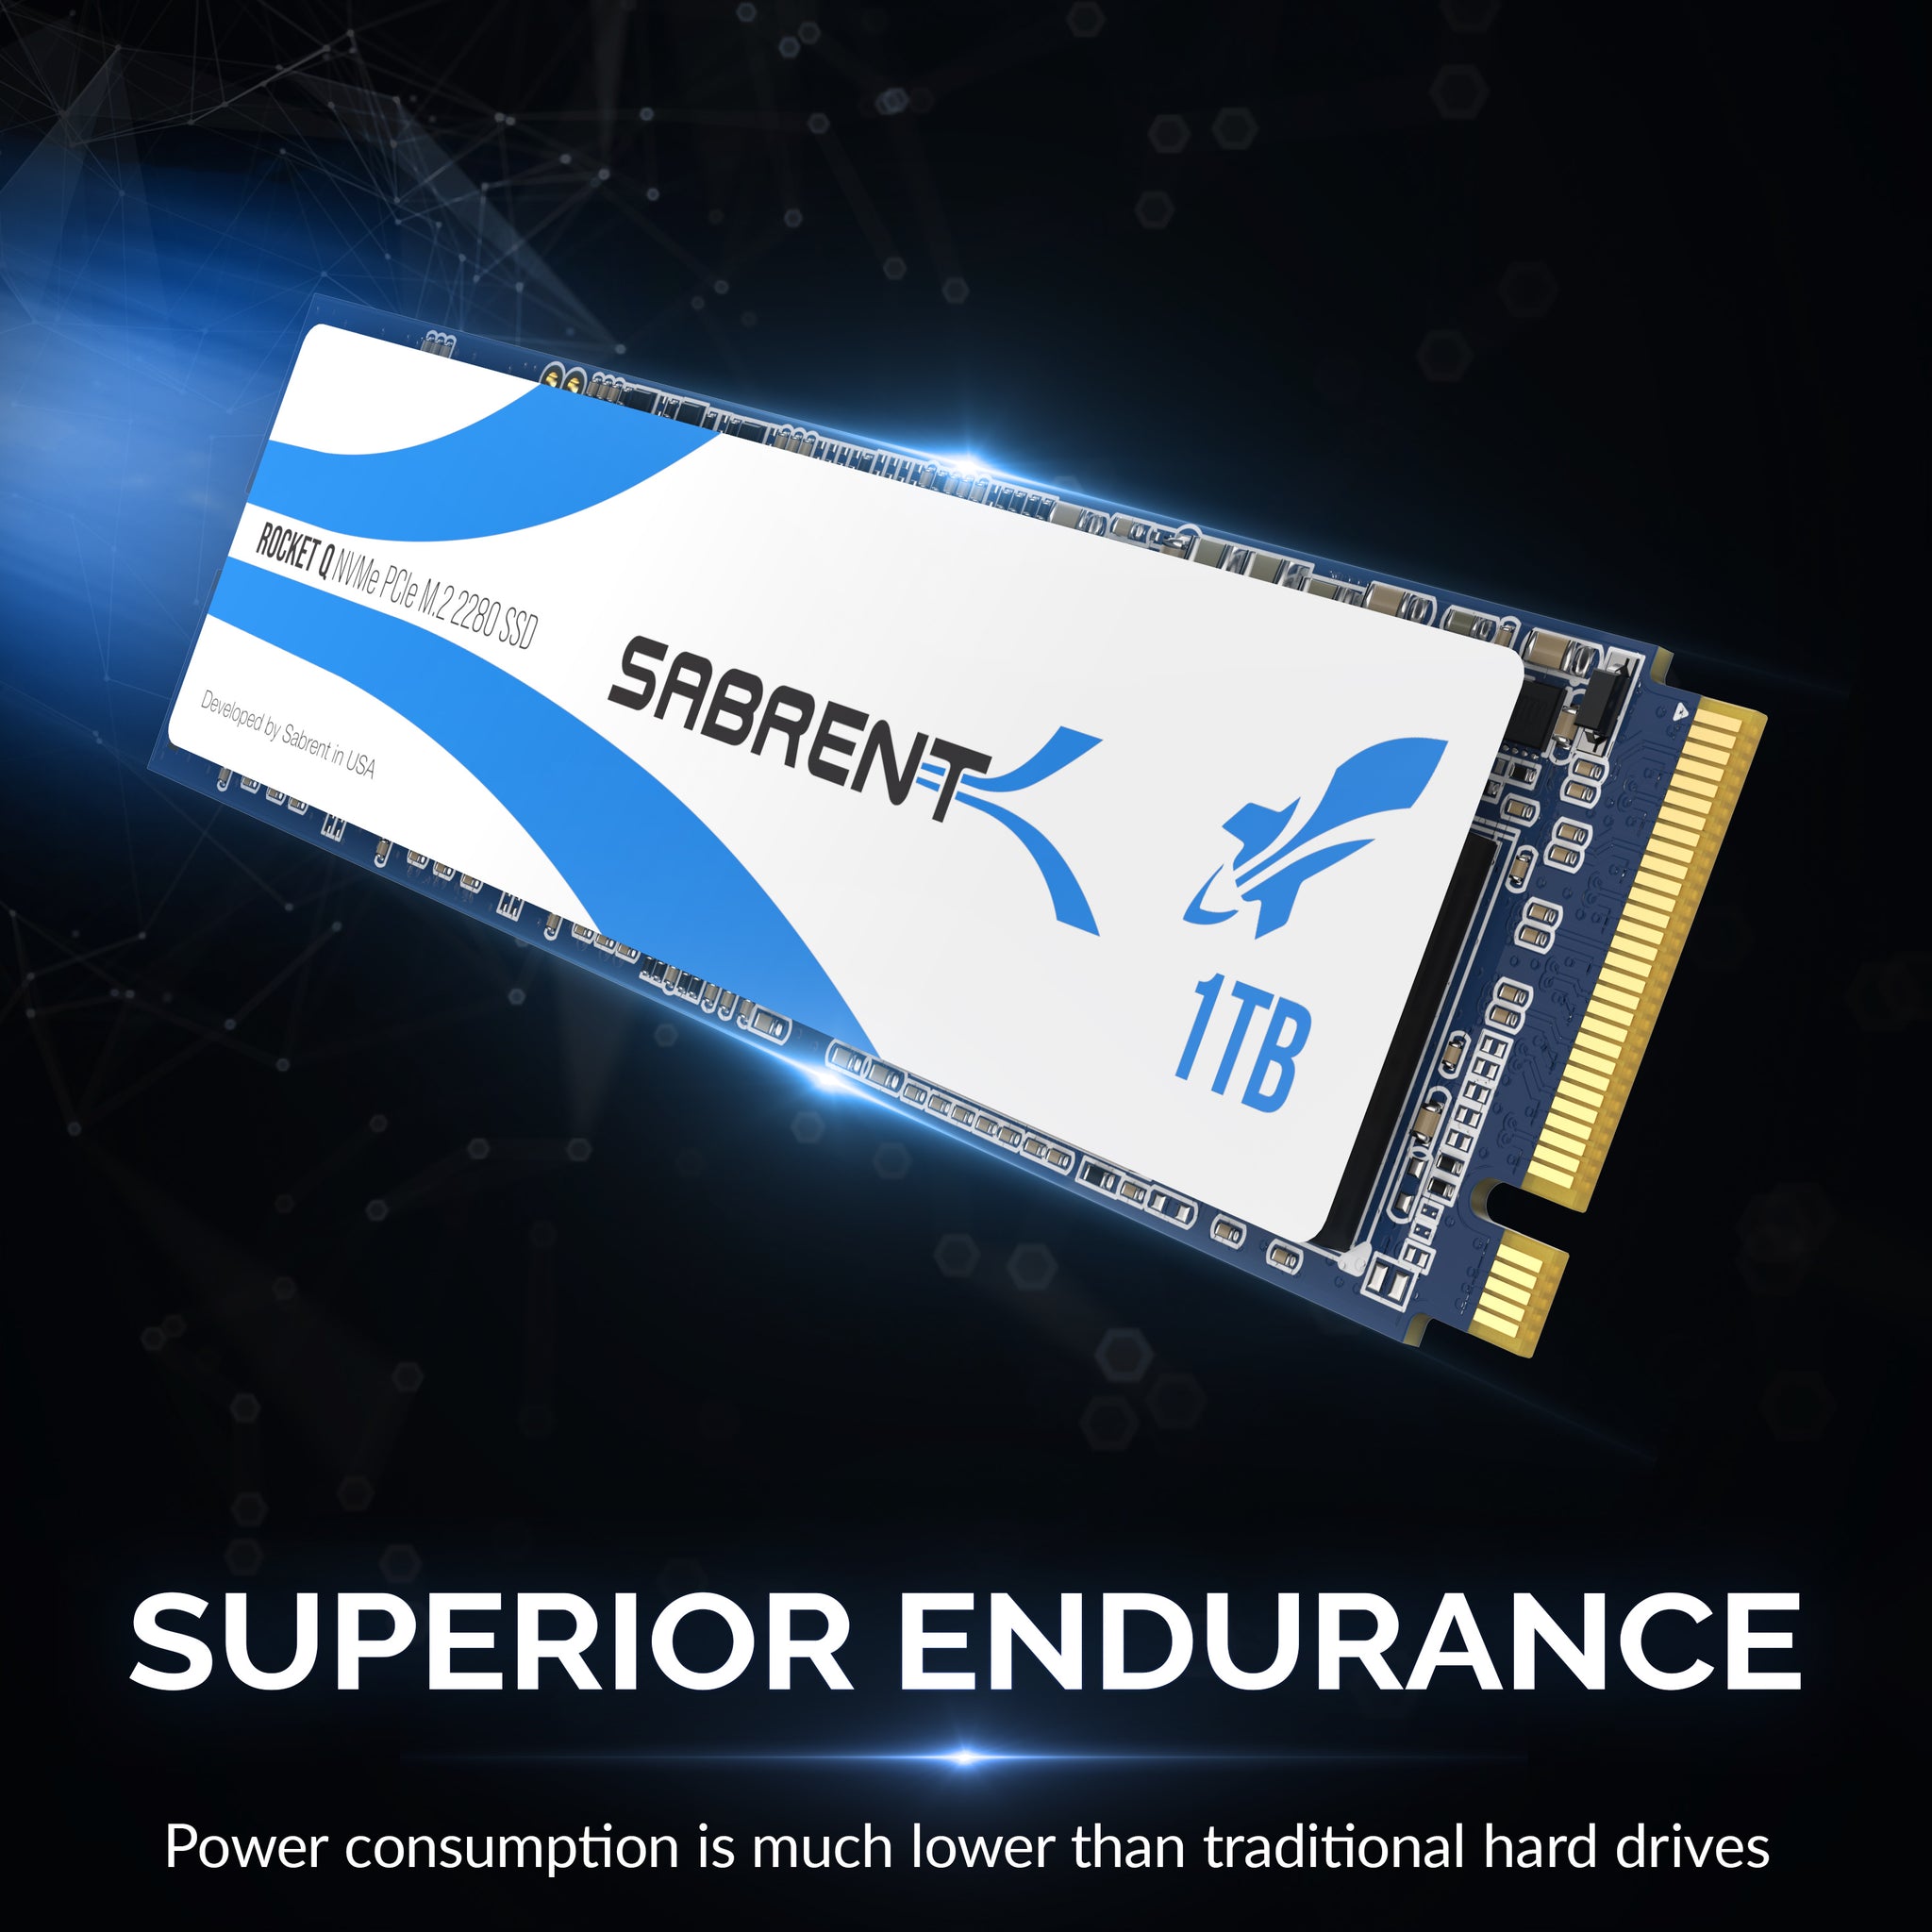 Sabrent Rocket 1 TB NVMe M.2 SSD review - Miracle bag or bargain?, Stress  test and full occupancy